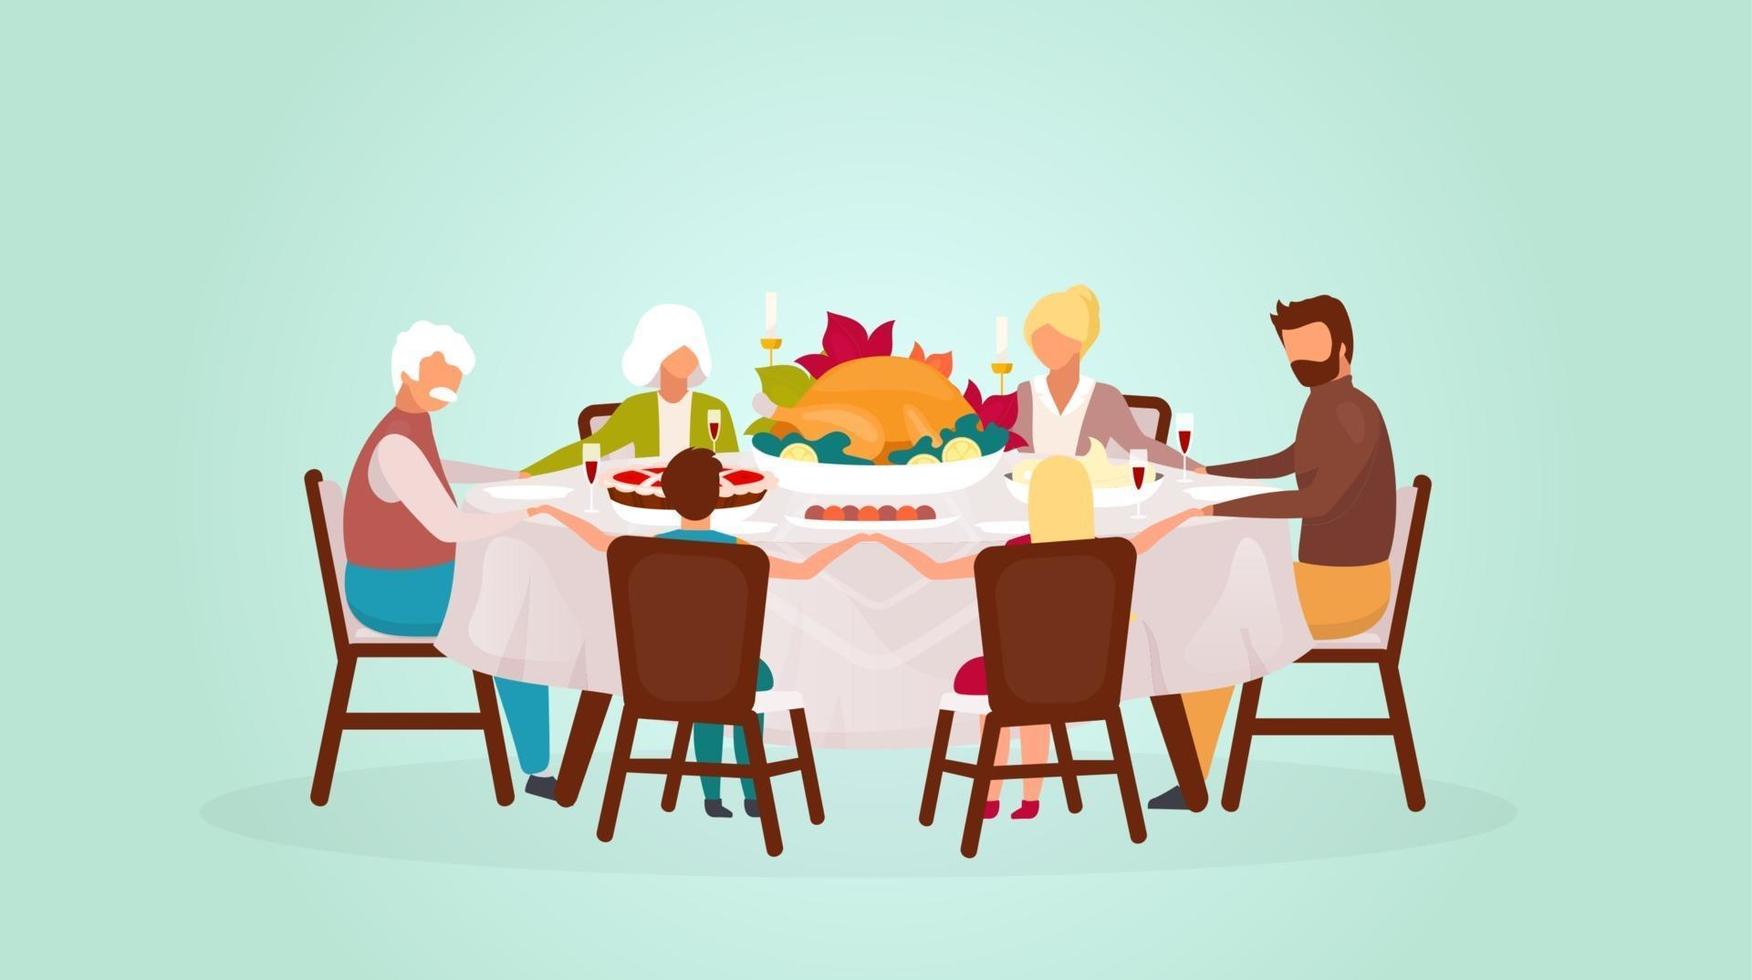 Thanksgiving day flat vector illustration. Fall holiday celebration. Eating festive meal together. Celebrating harvest with grandparents. Happy family dinner with turkey cartoon characters